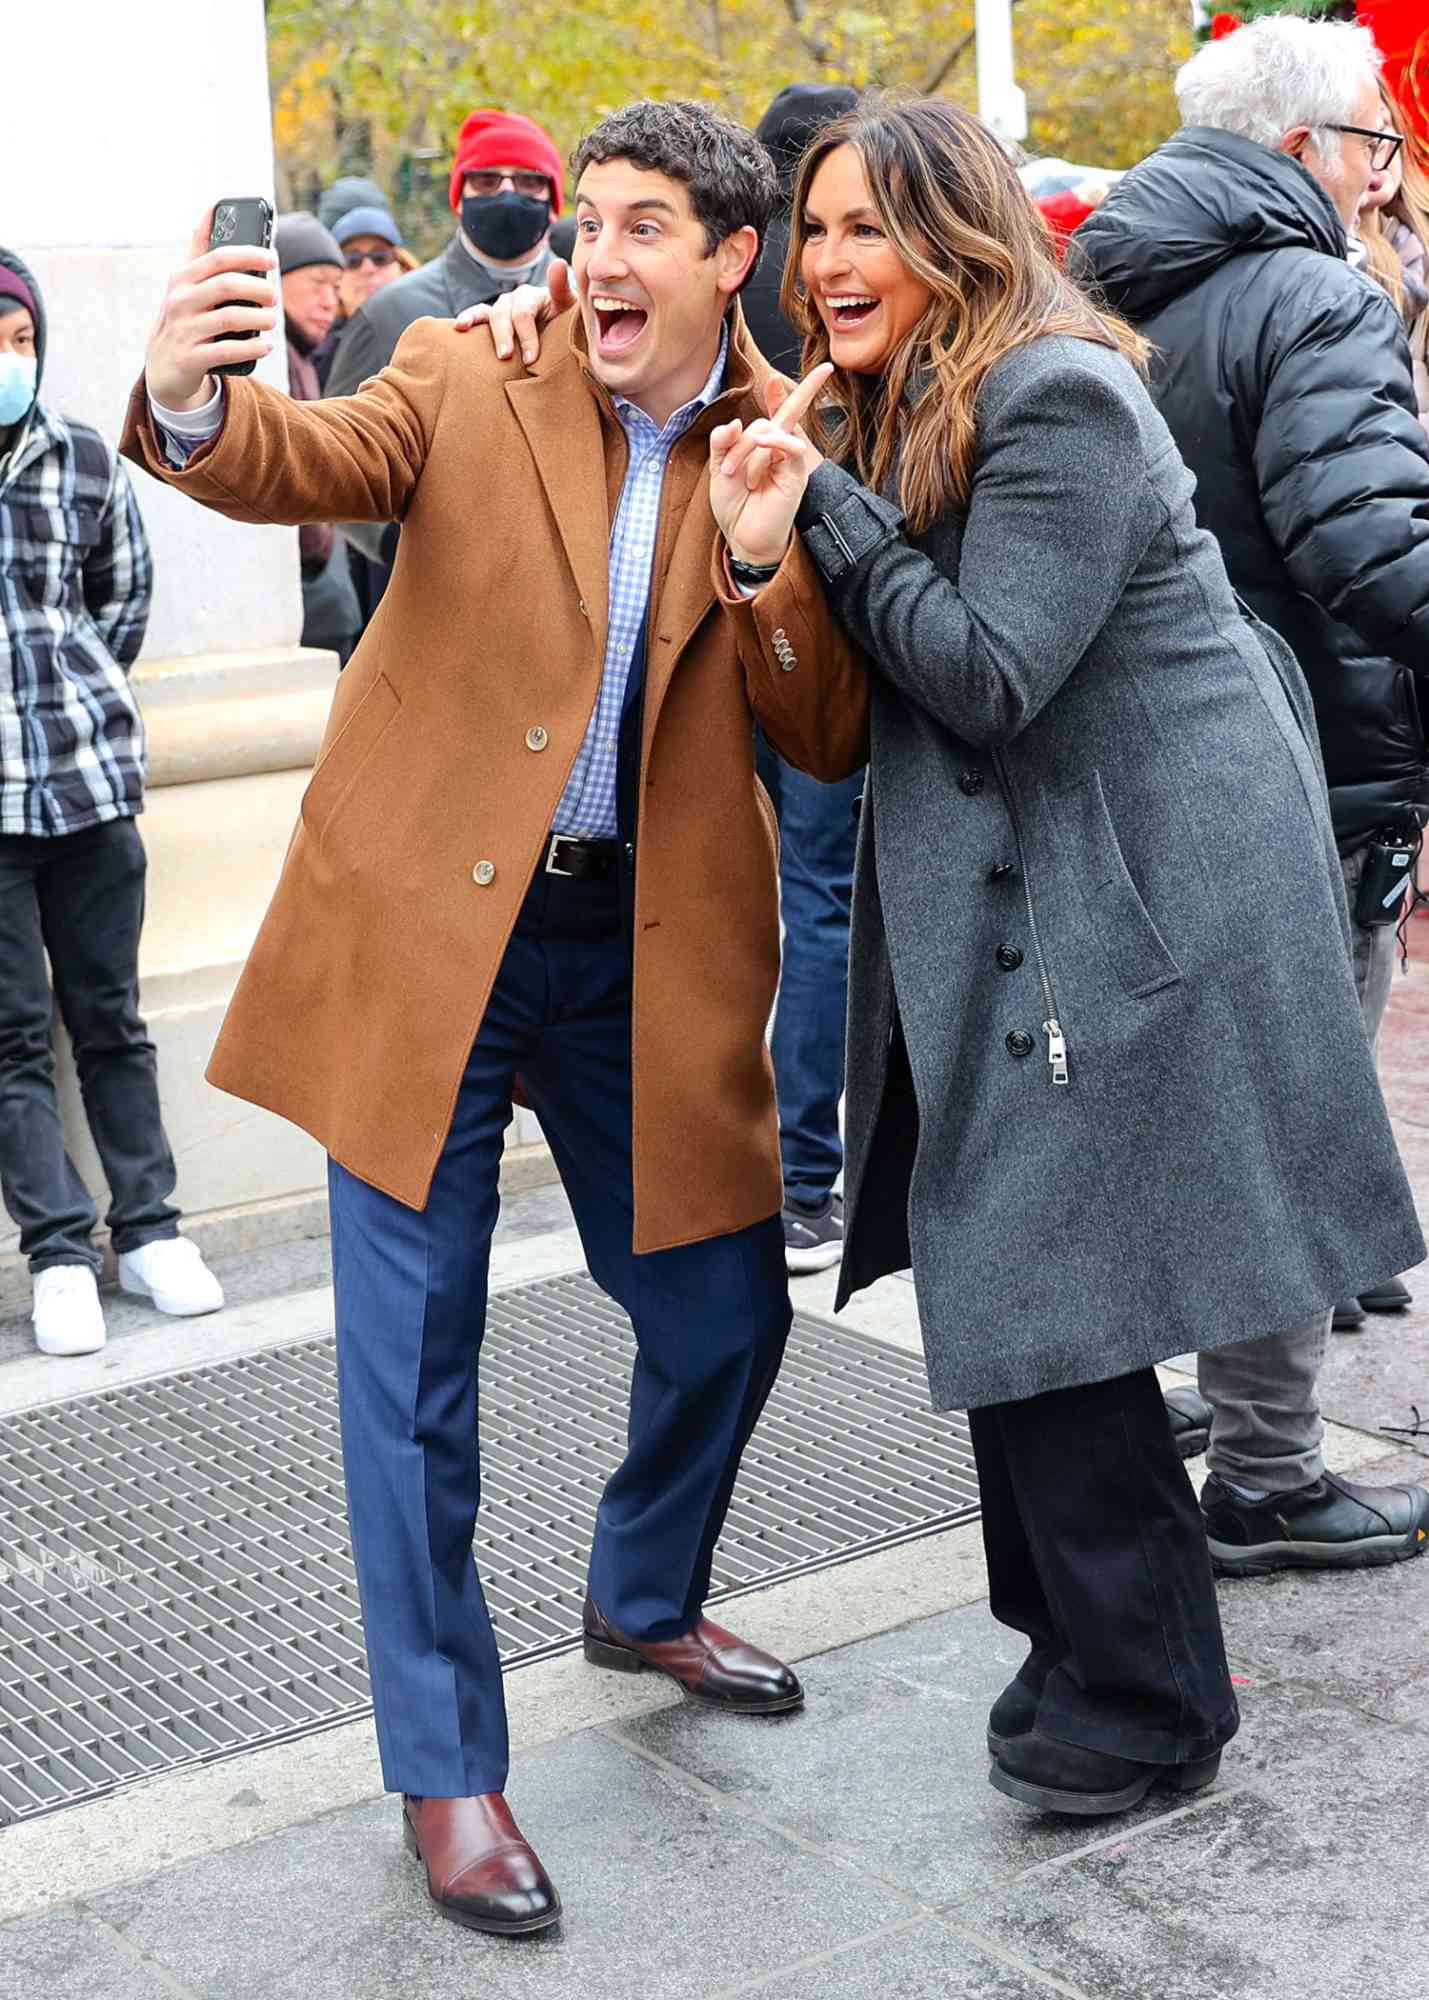 Jason Biggs is seen on the film set of the 'Law and Order: Special Victims Unit' in New York City. NON-EXCLUSIVE November 30, 2021. 30 Nov 2021 Pictured: Mariska Hargitay,Jason Biggs.